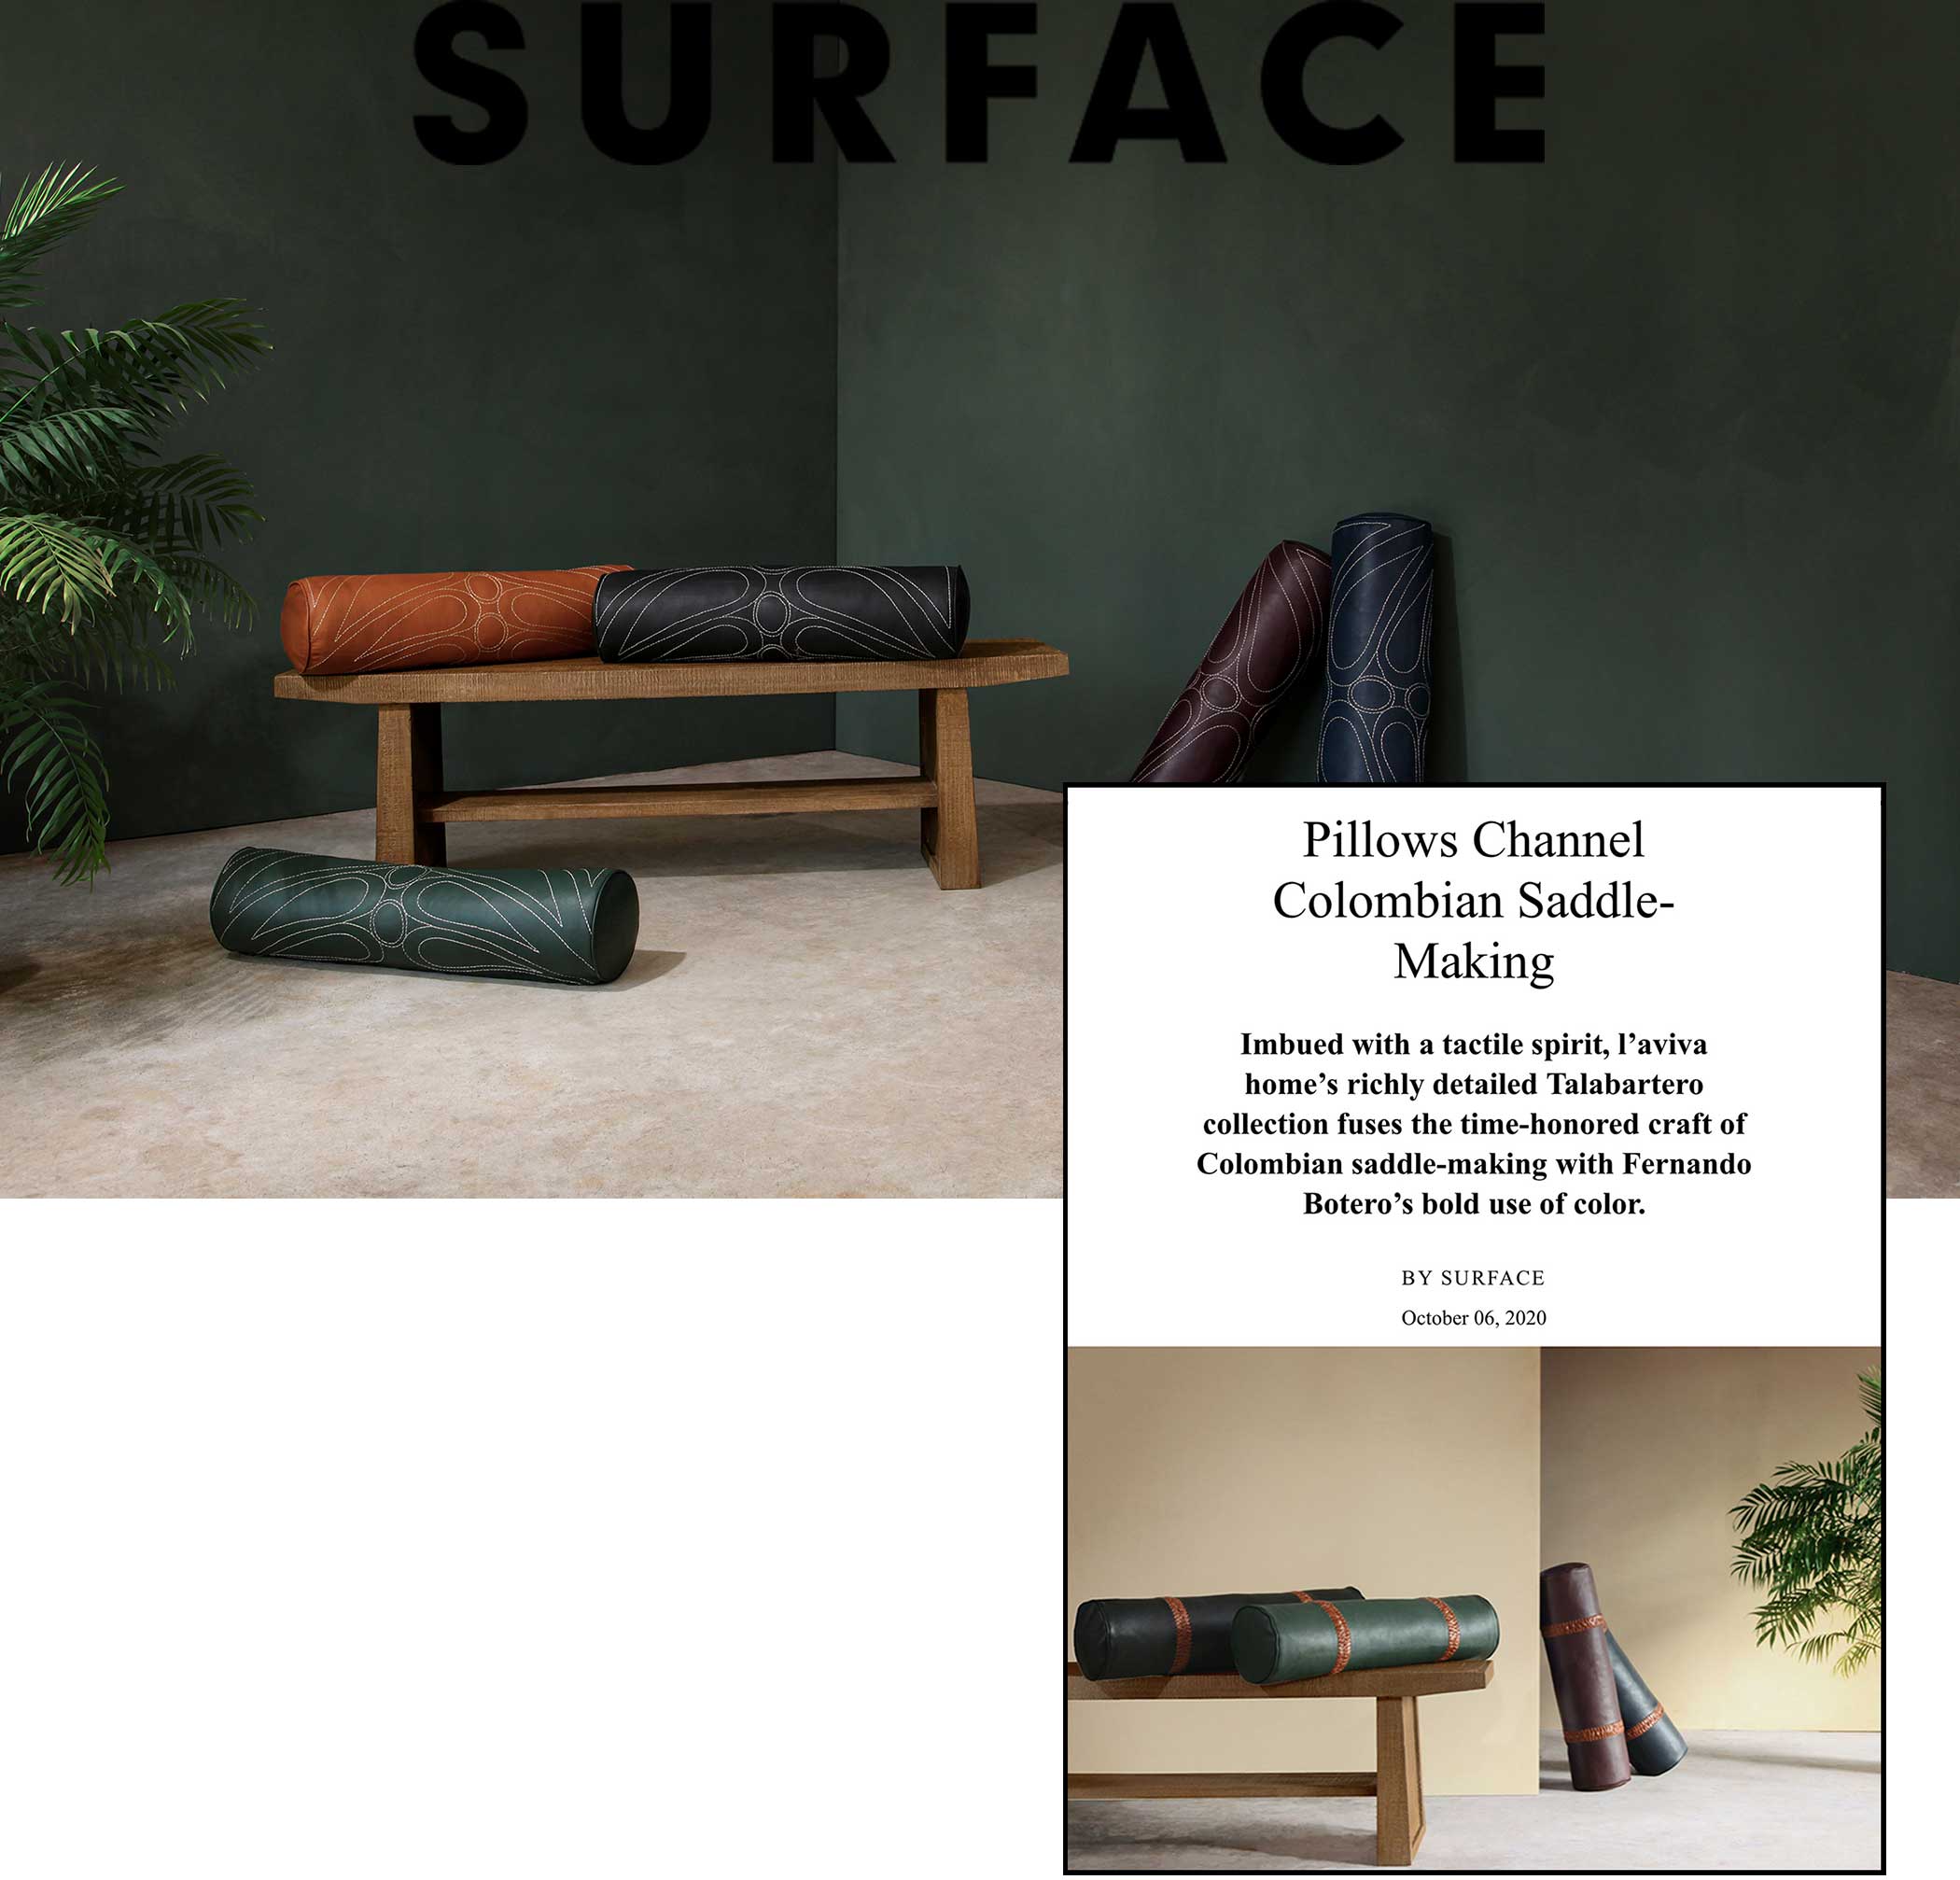 Talabartero Leather Collection featured in Surface Magazine